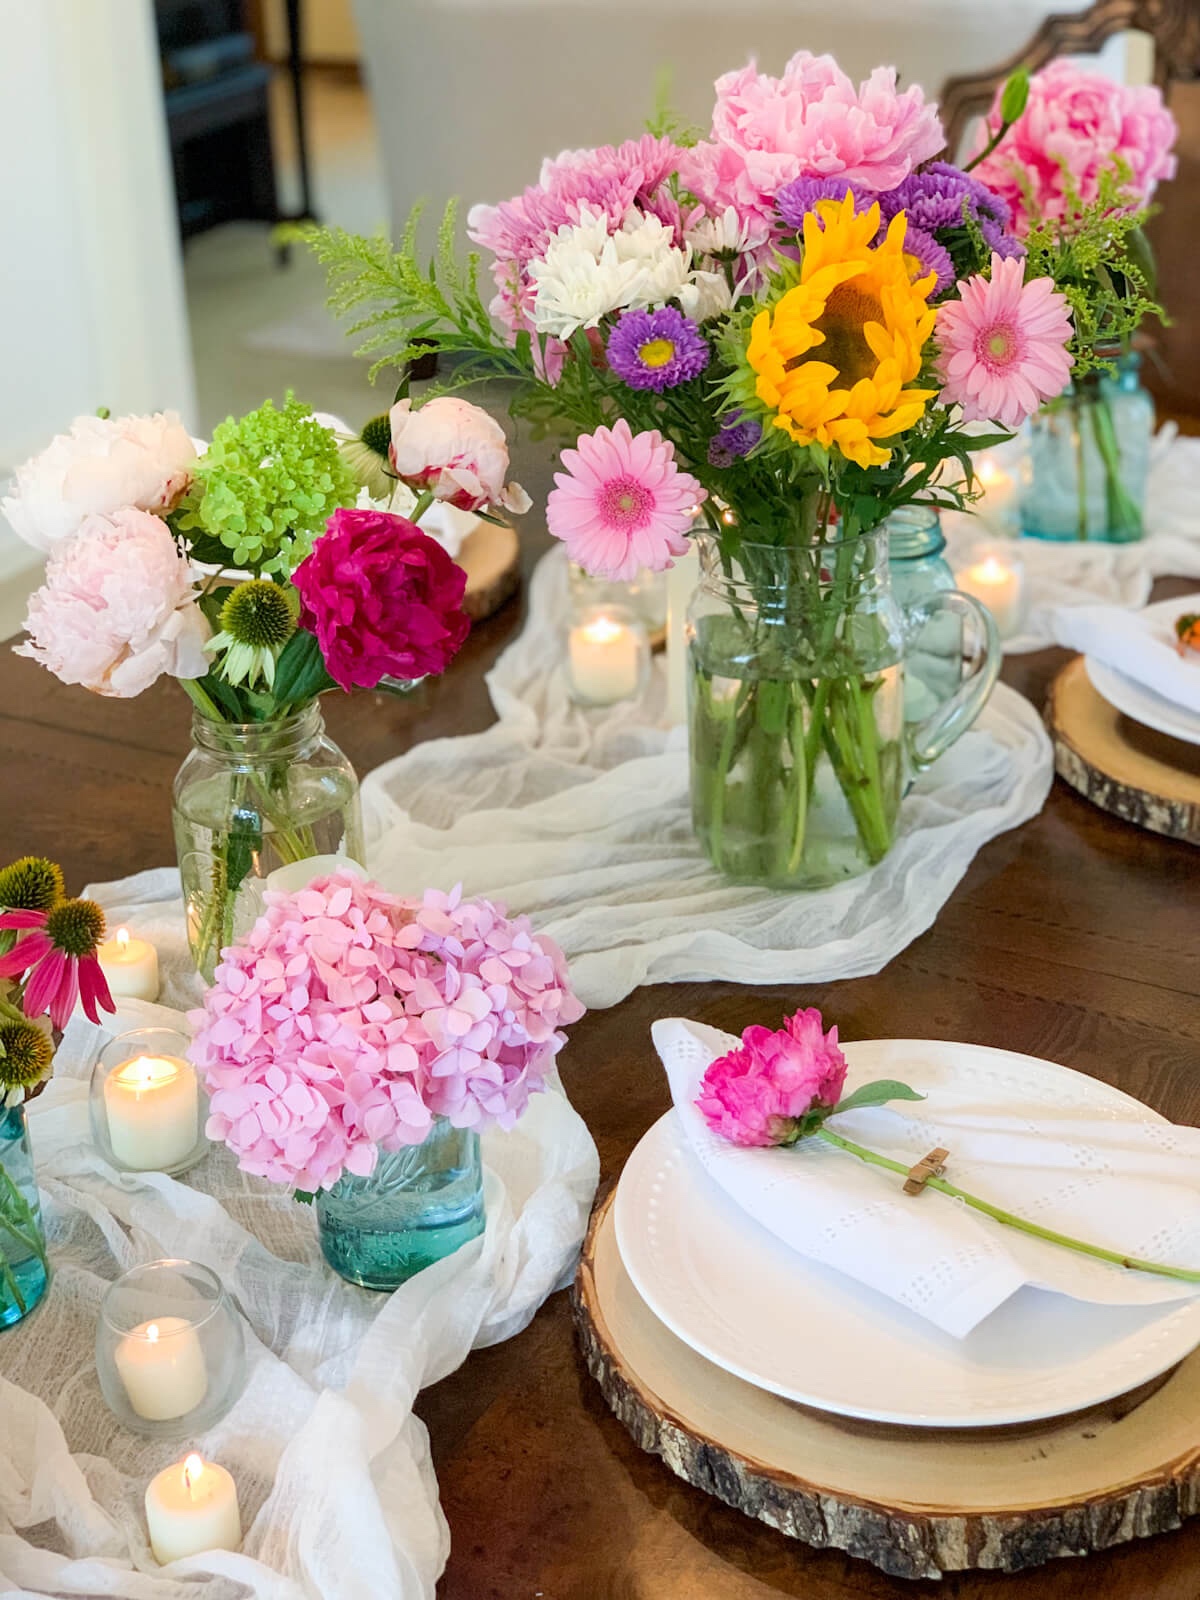 A place setting with a wood charger sits beside a summery country centerpiece.